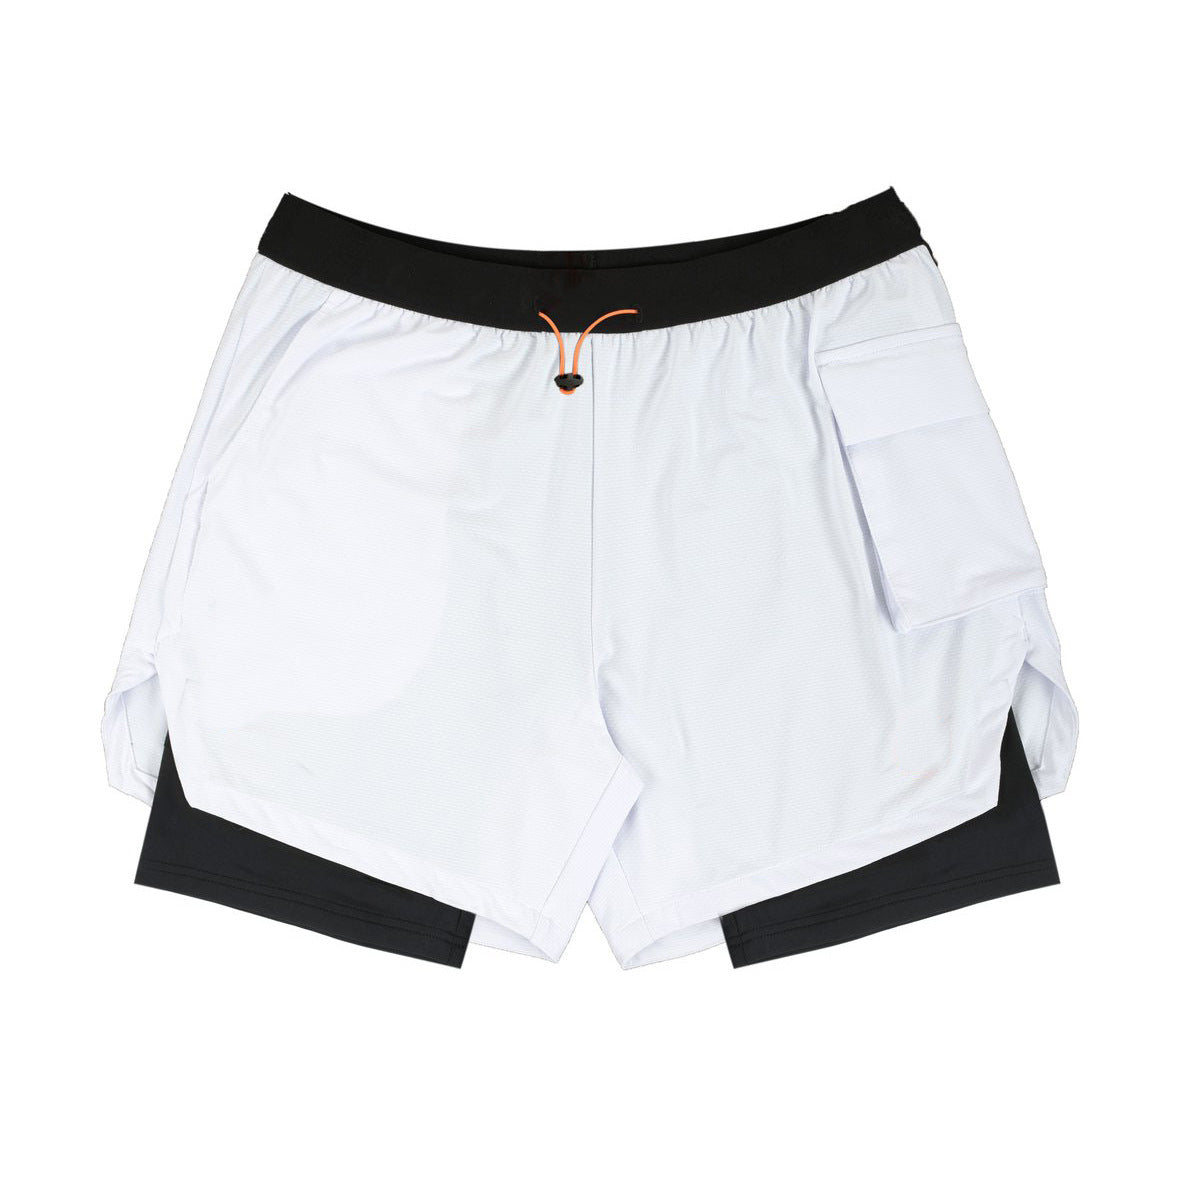 Men's Stretch Double Layer Shorts